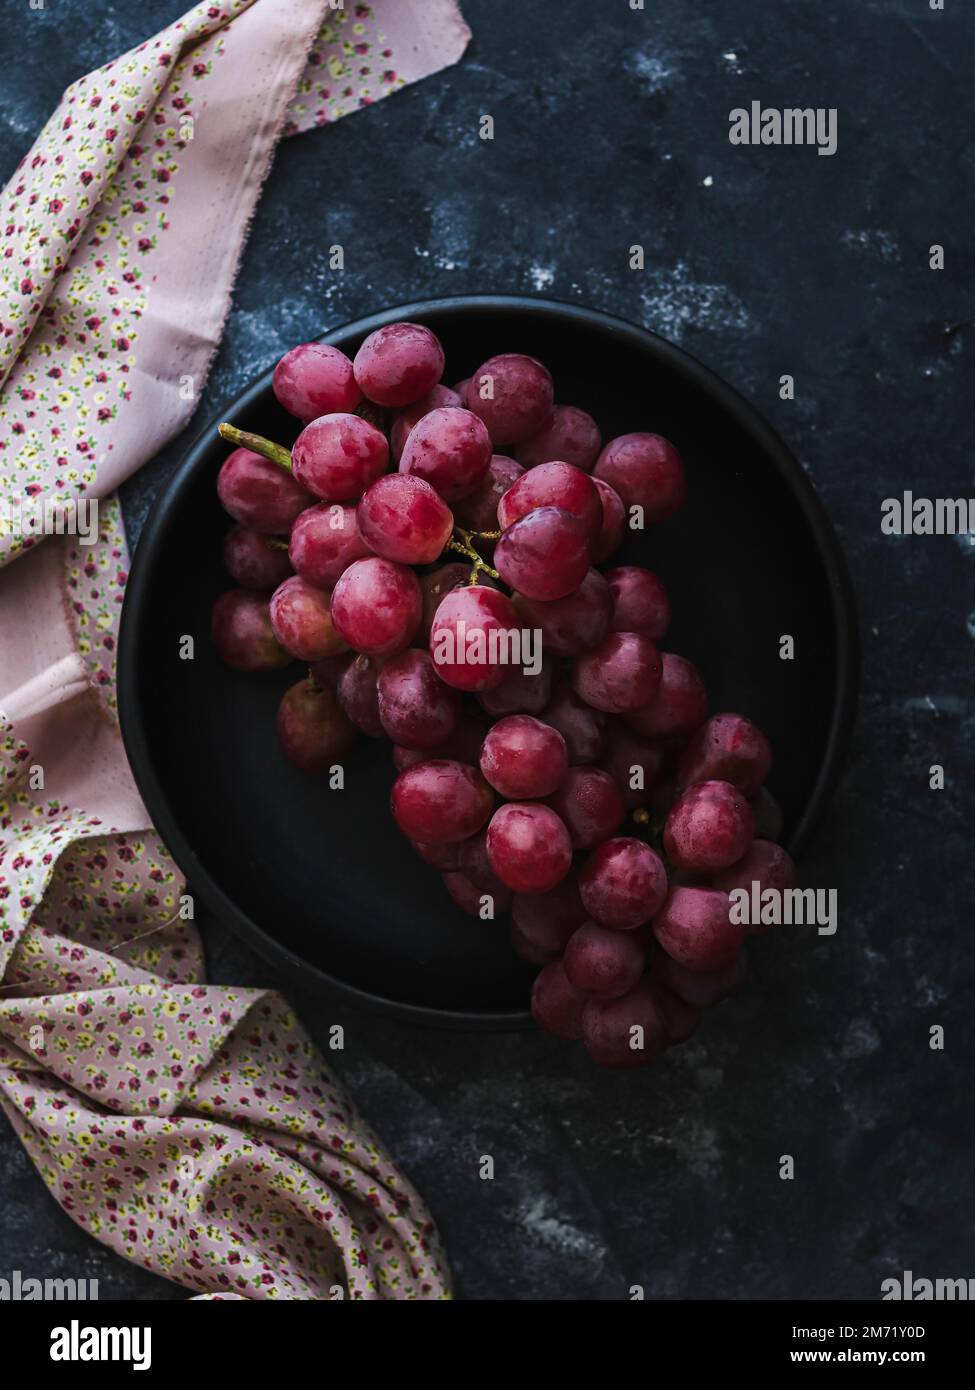 Bunch of grapes on a black plate Stock Photo